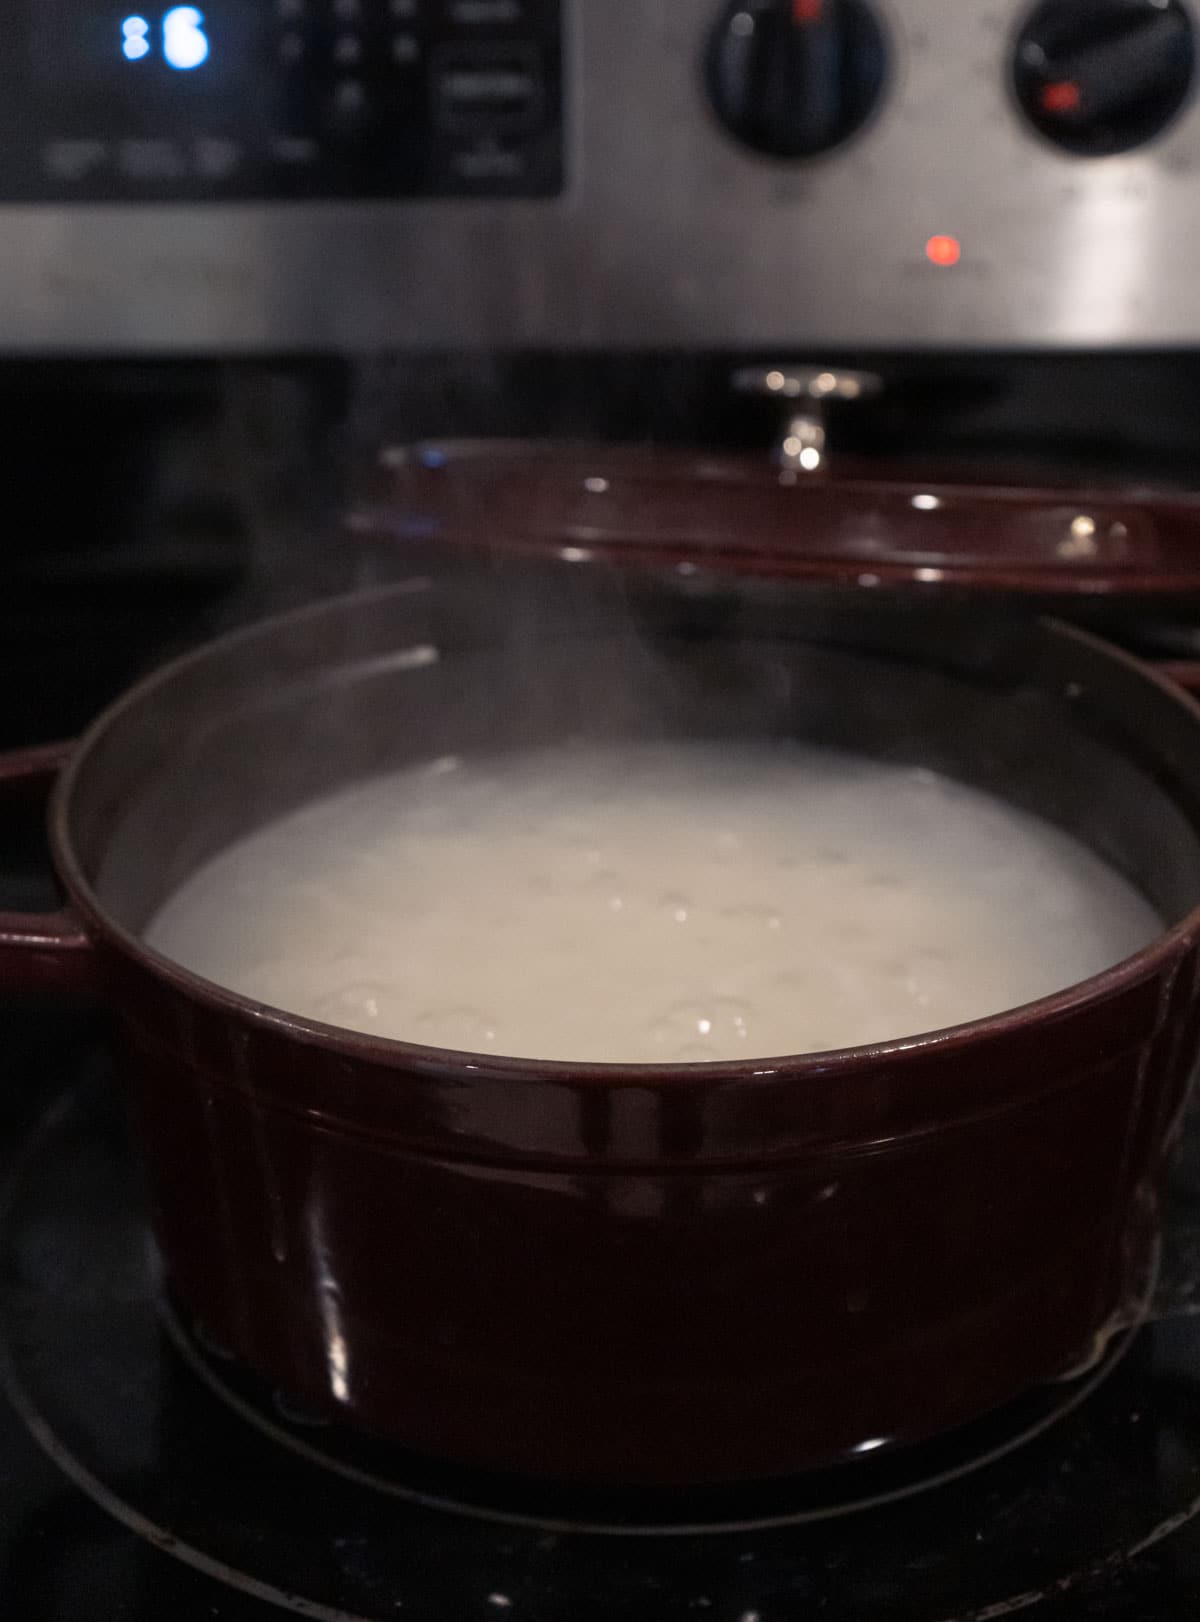 Cooking congee on the stove. 